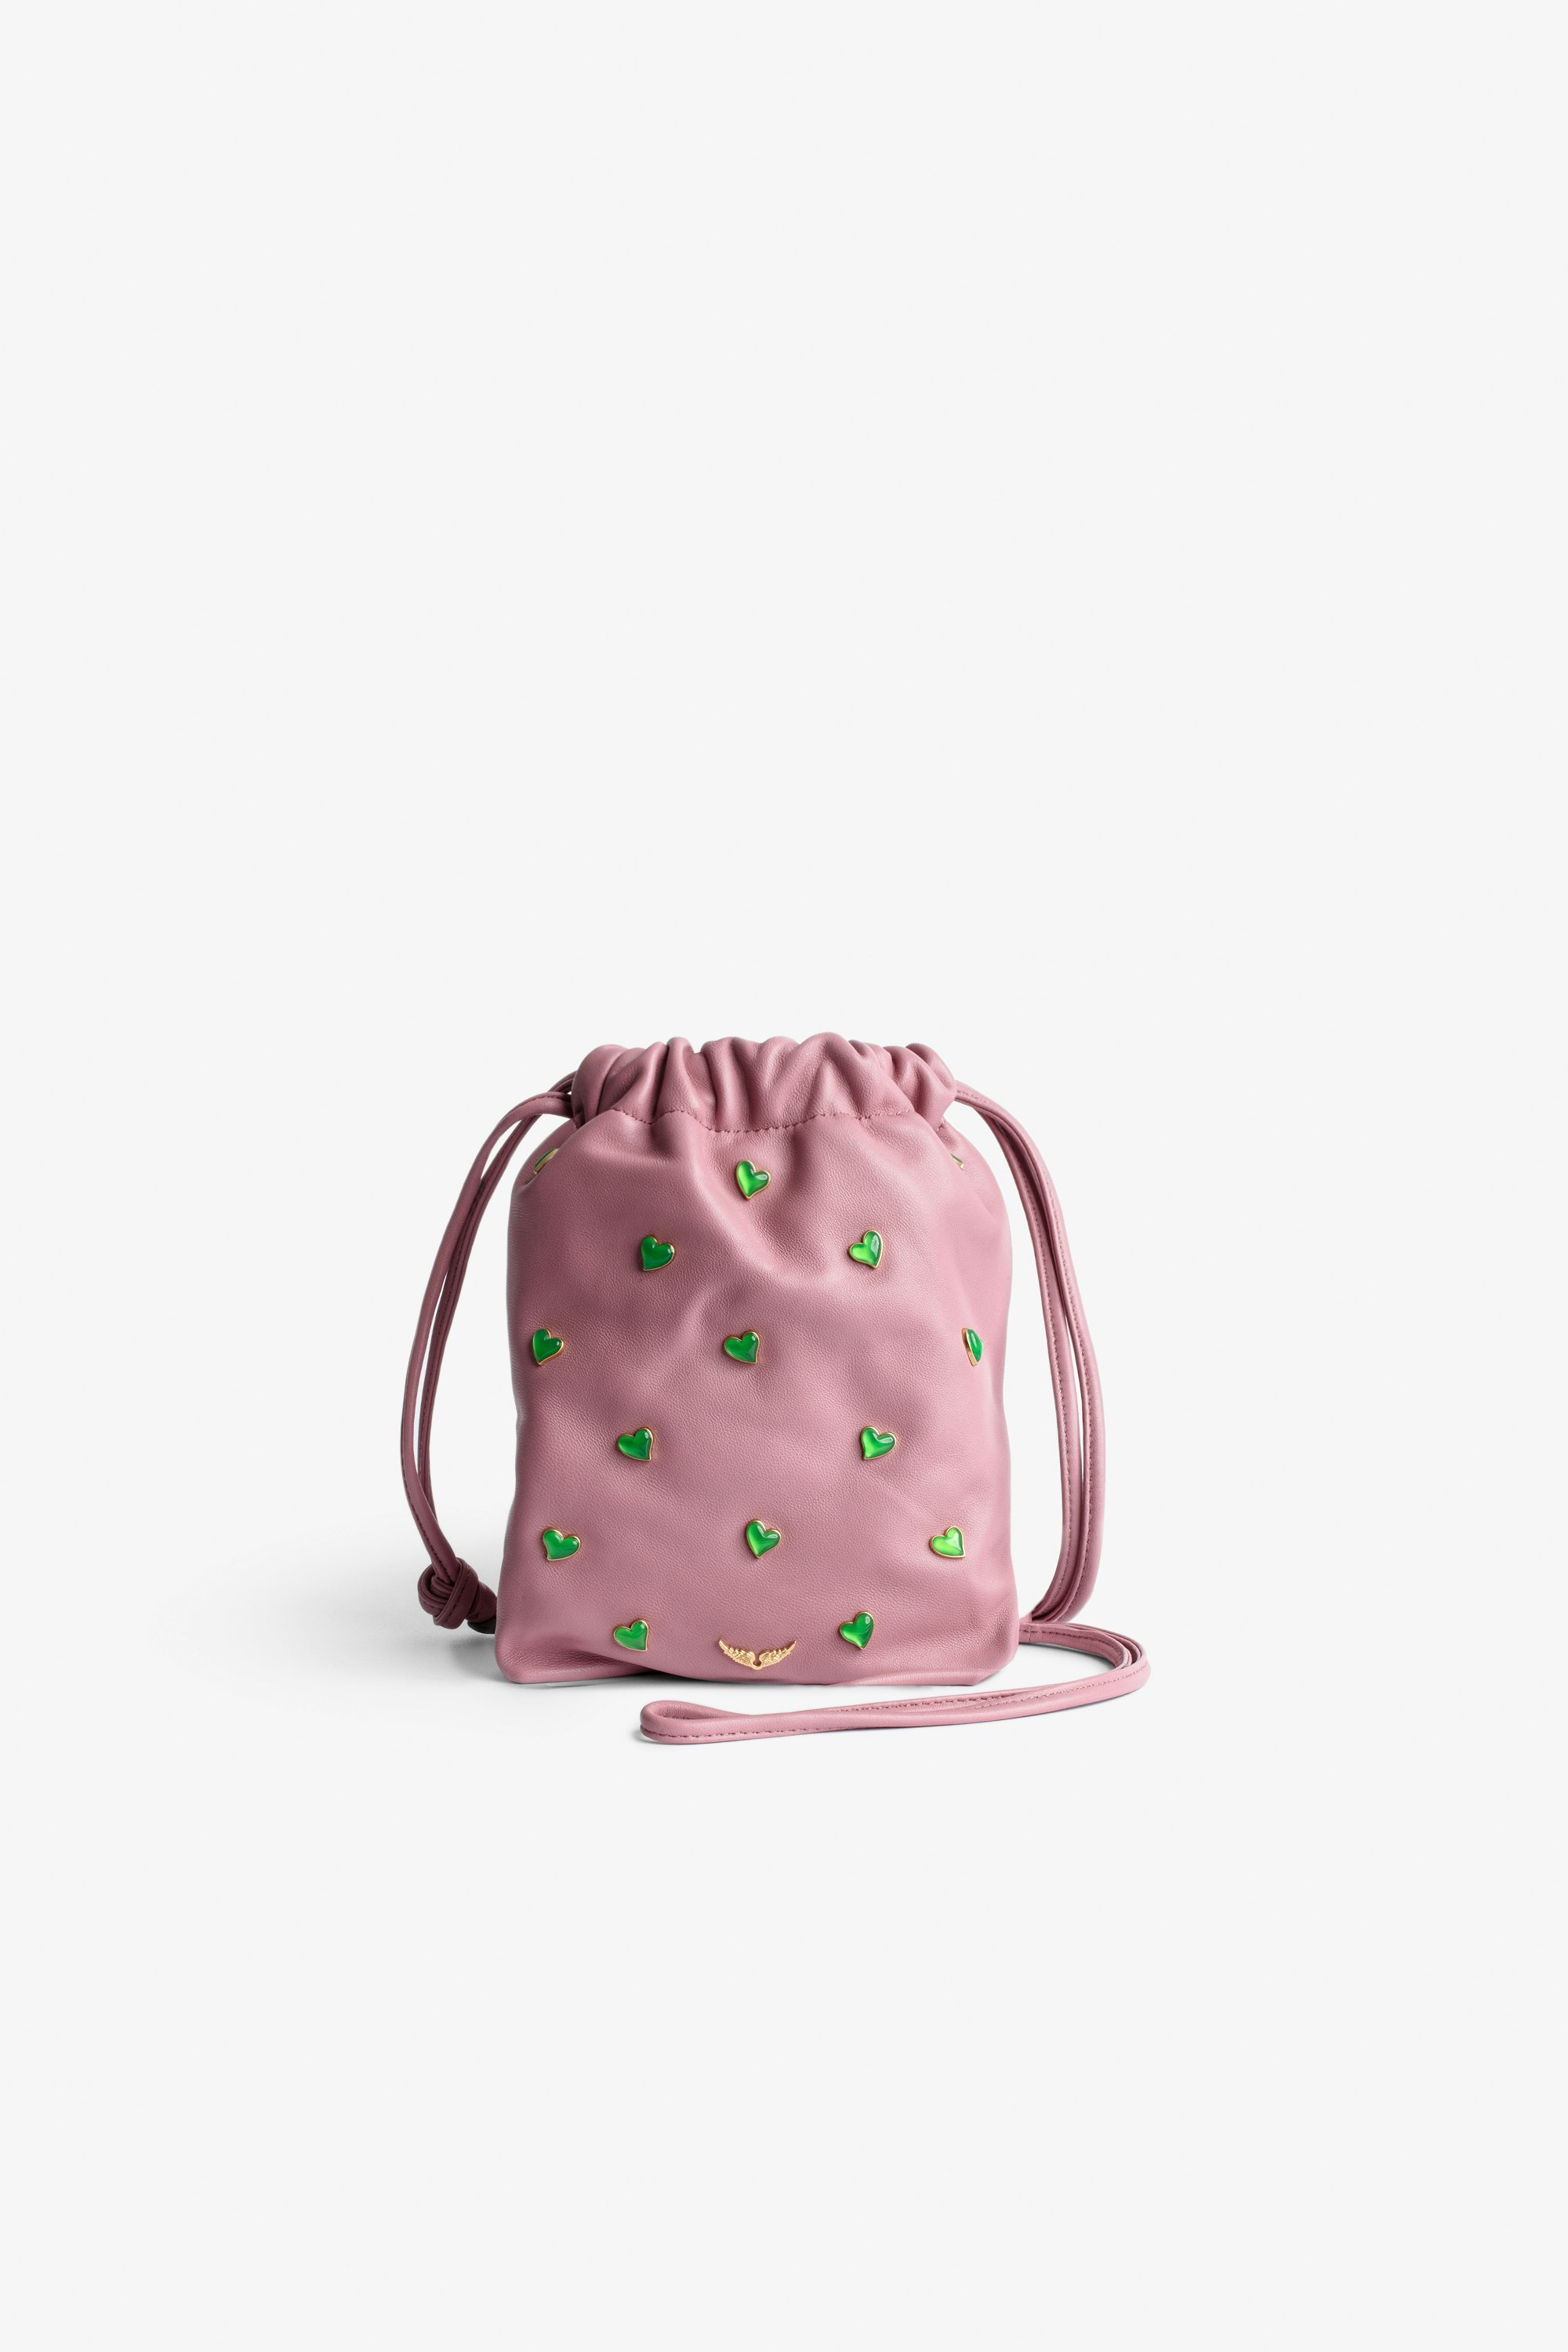 Rock To Go Bag Women’s bucket bag in pink leather studded with green crystal hearts